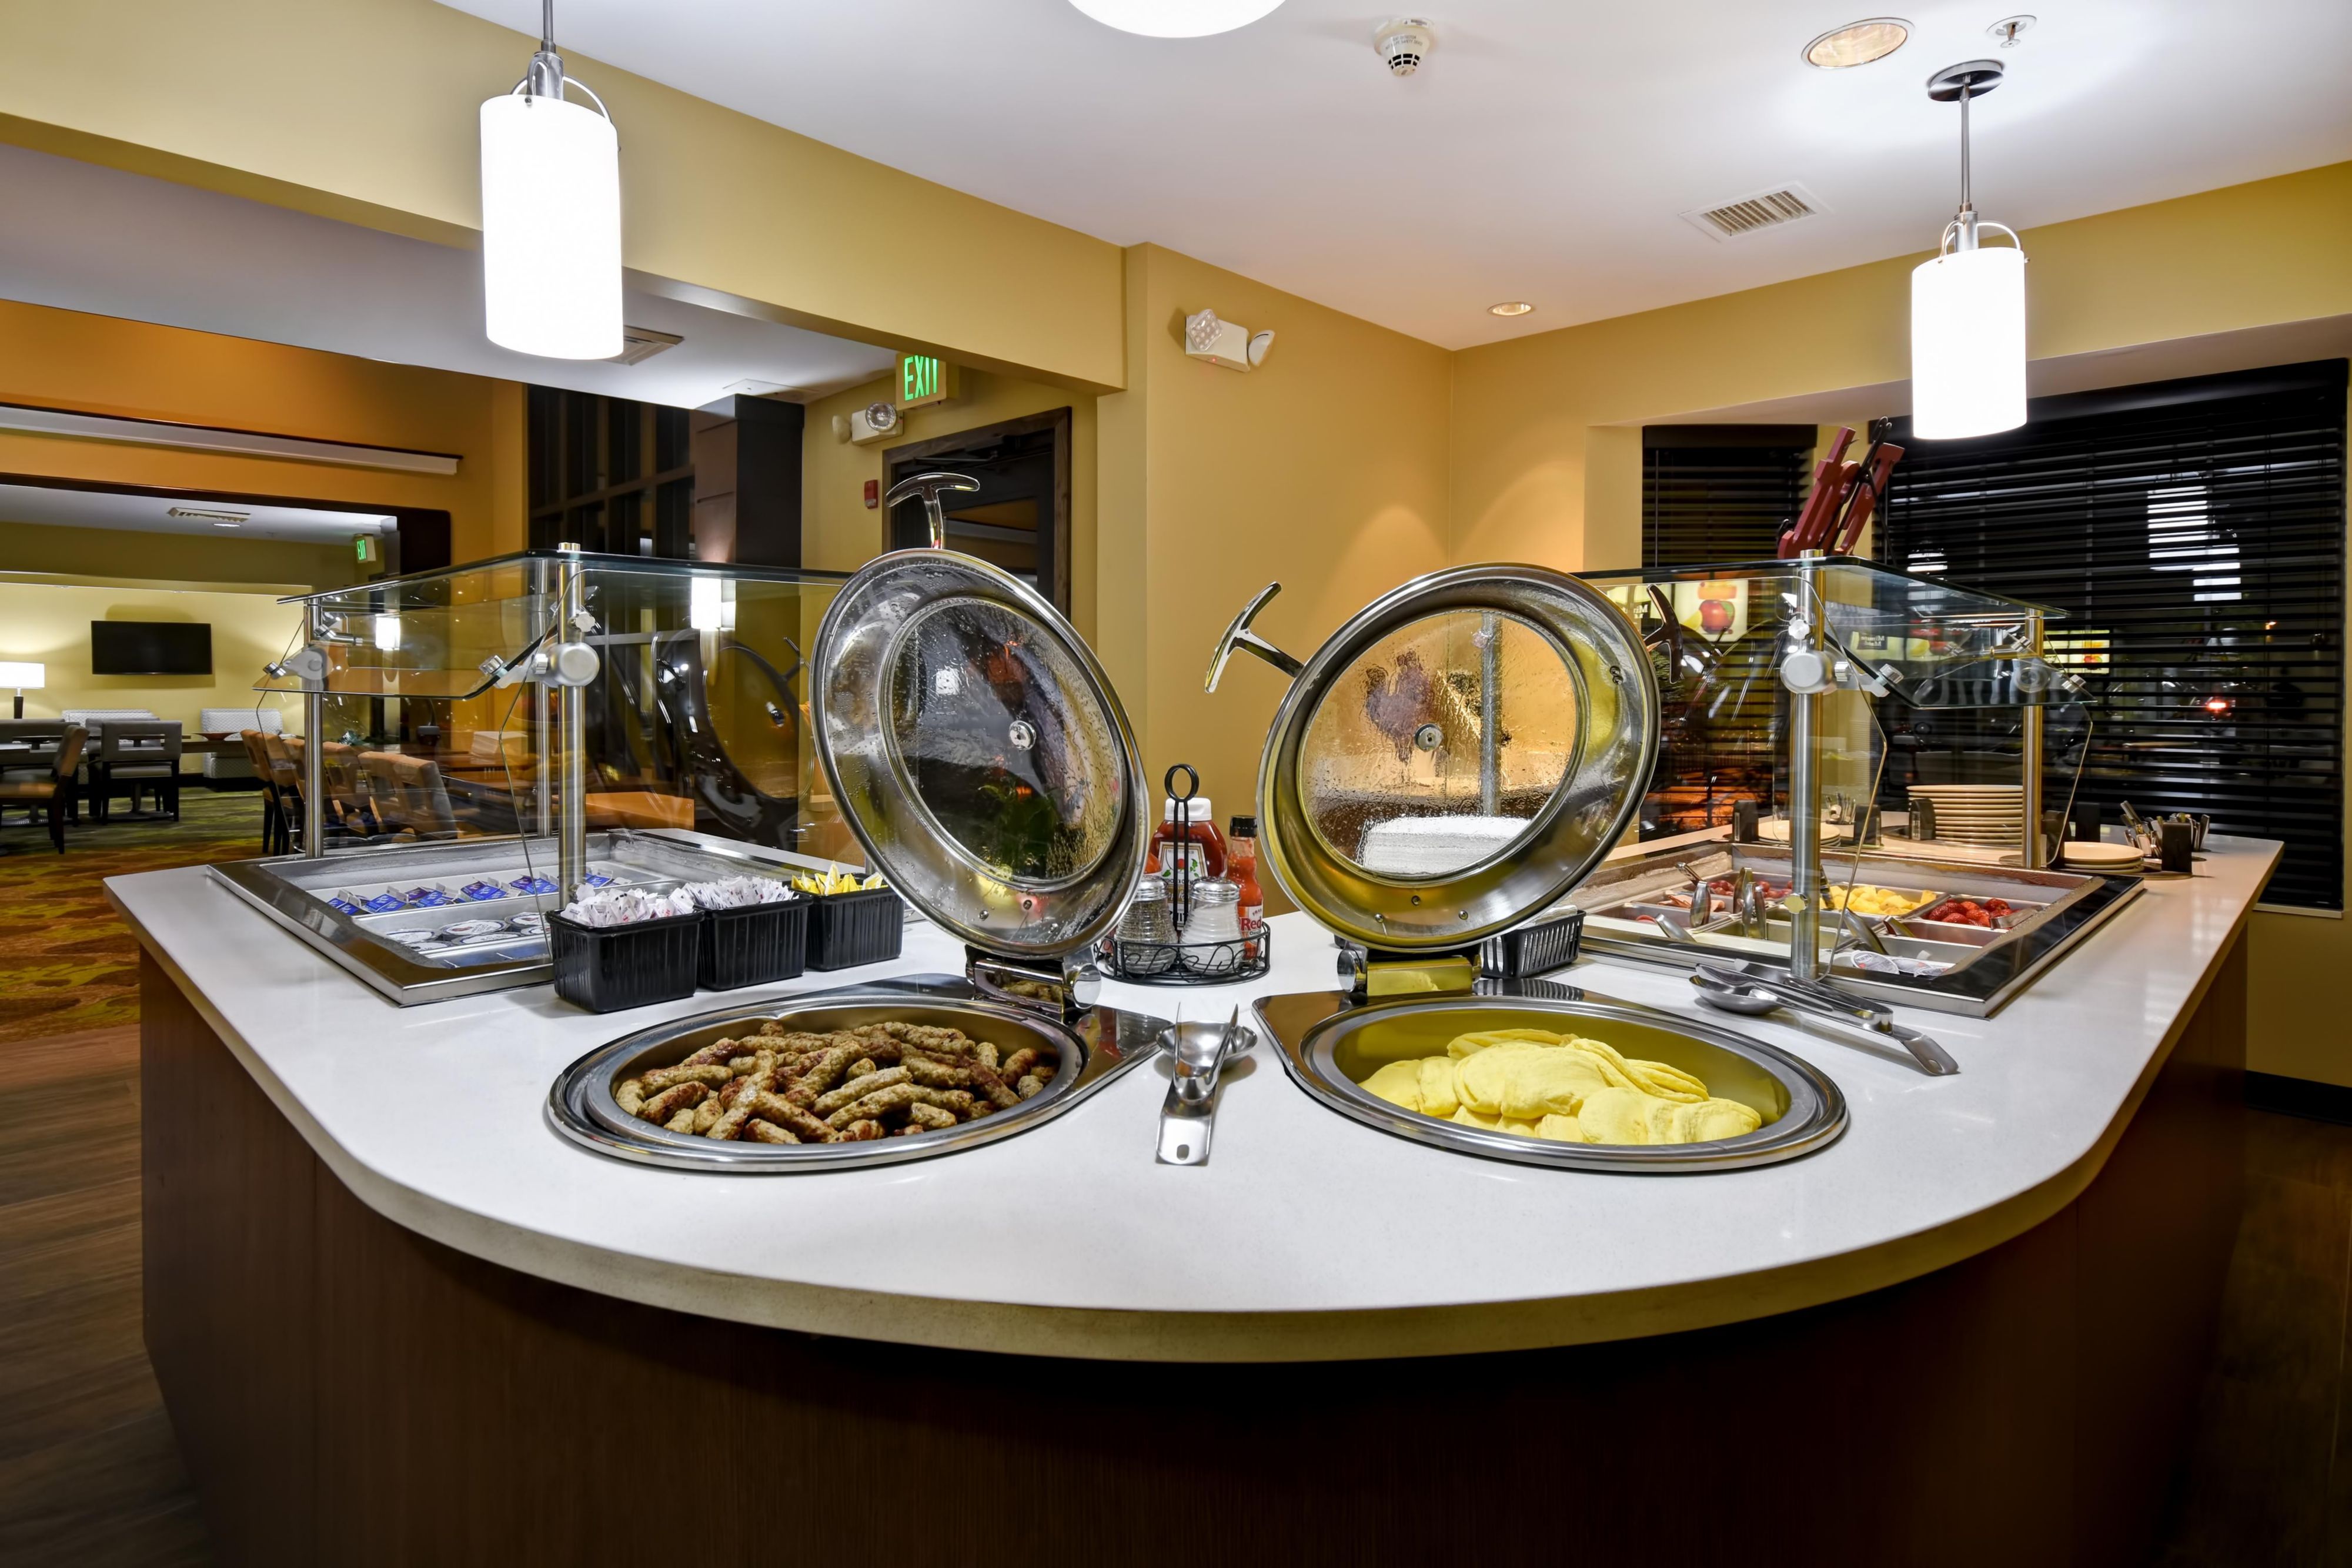 Enjoy a Complimentary Hot Breakfast when you stay at the Staybridge Suites Grand Rapids. With daily selections of scrambled eggs, sausage or bacon, yogurt parfait station, make your own waffle station, cereals, breads, fresh baked blueberry muffins, oatmeal and more you will easily be satisfied each and every day.